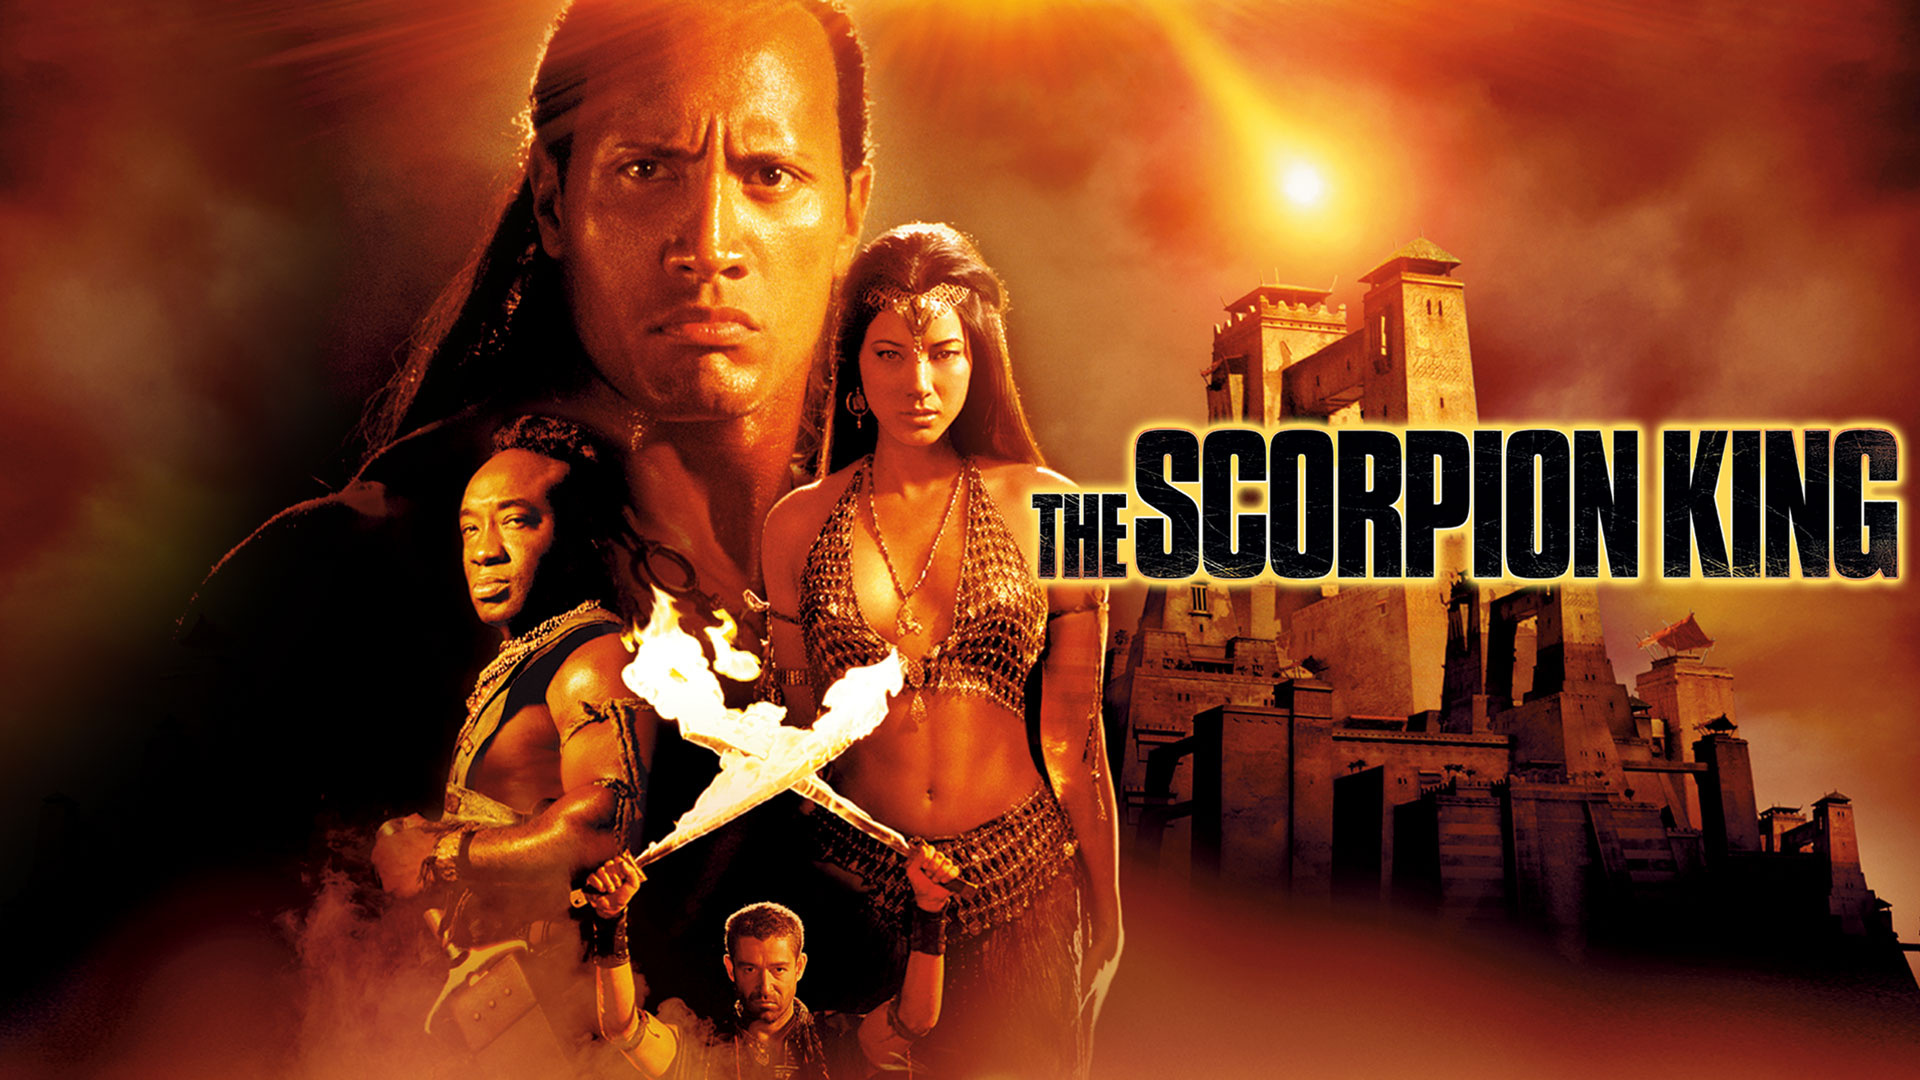 The Scorpion King, Action movies, Adventure, Ancient Egypt, 1920x1080 Full HD Desktop